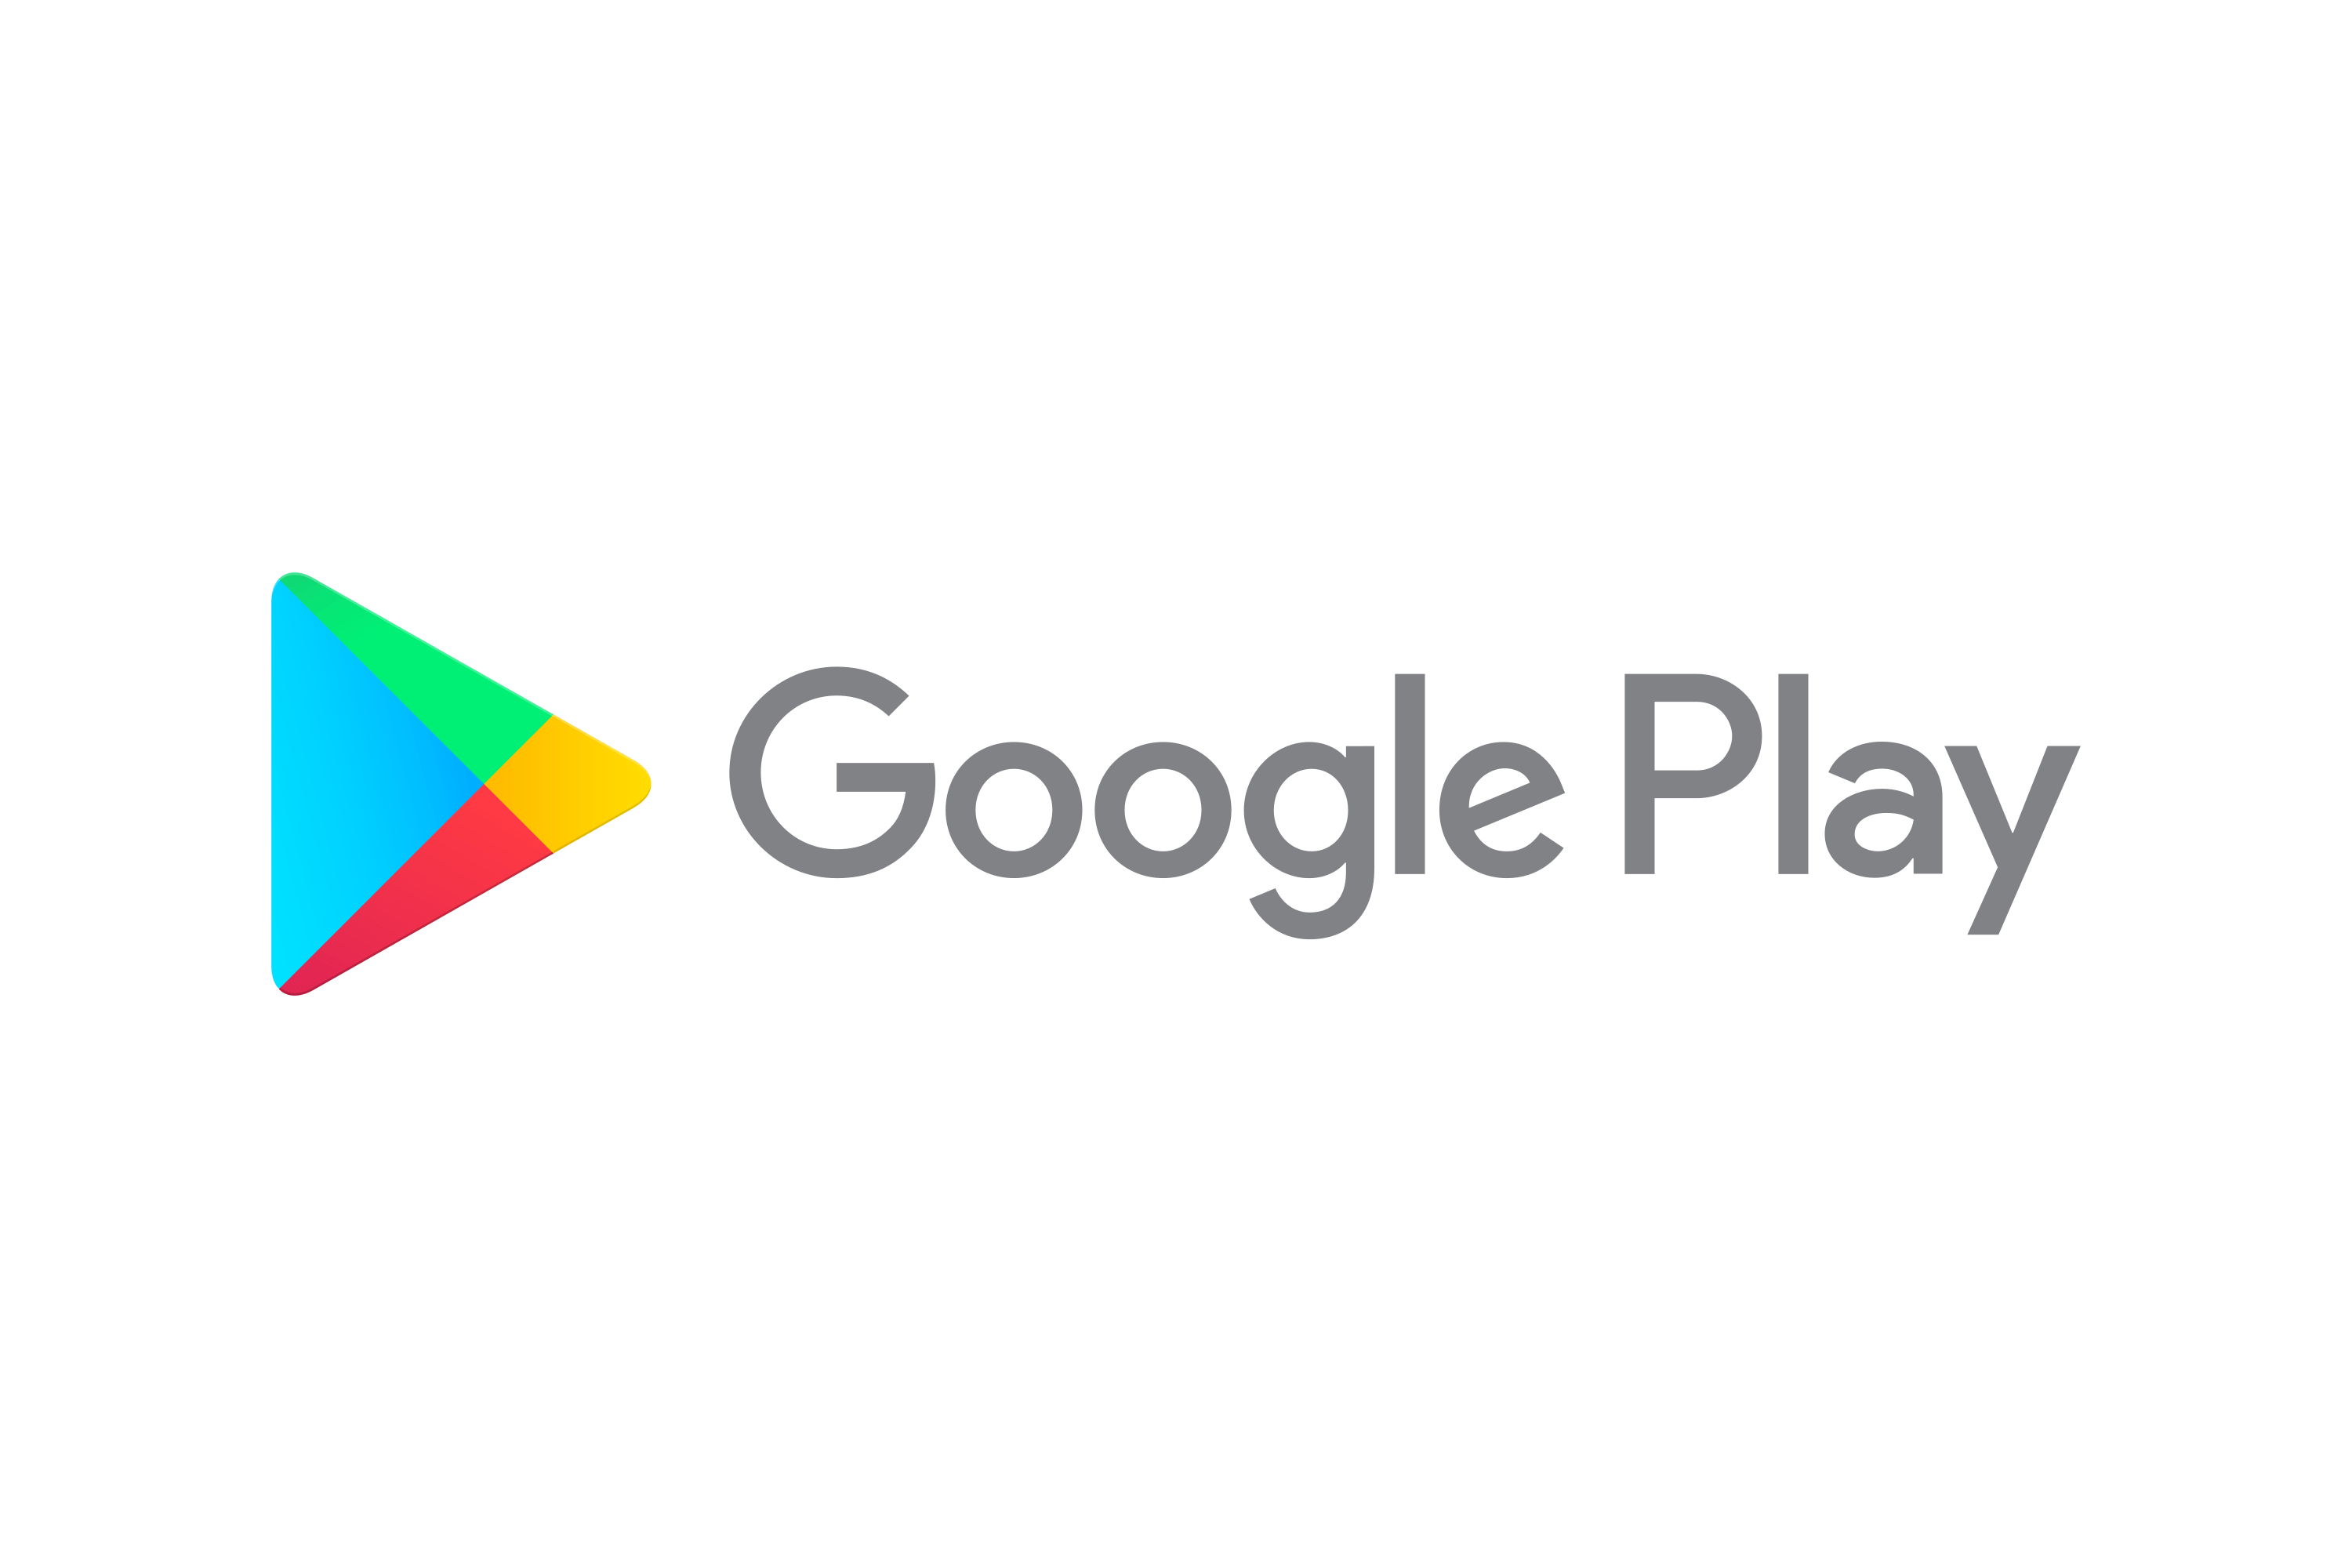 How to install the Google Play Store on the  Fire Tablet